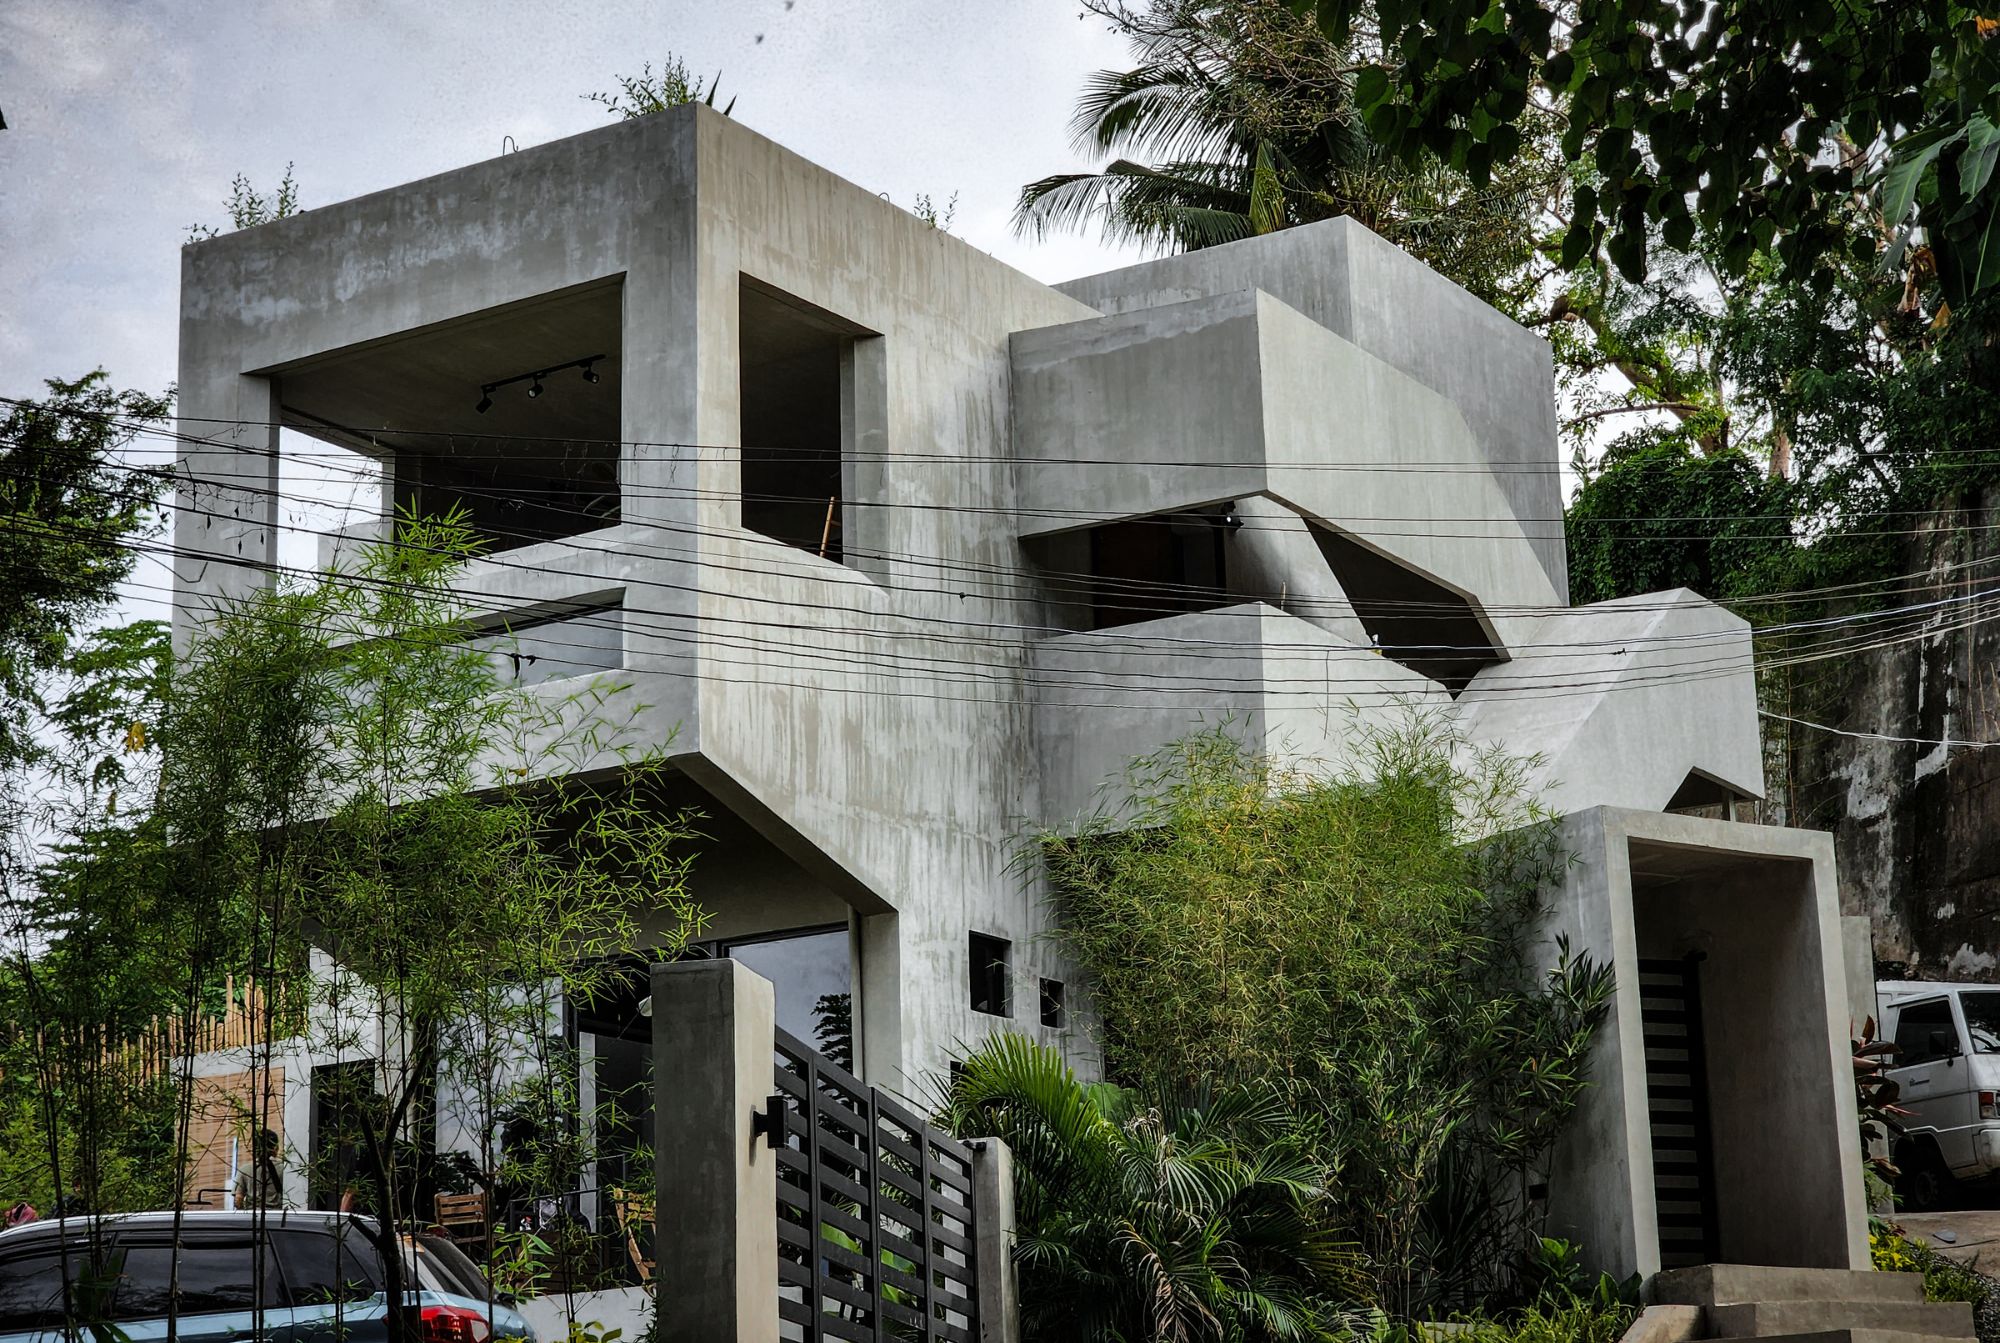 Casa Borbon, a vacation village in the style of tropical brutalism.